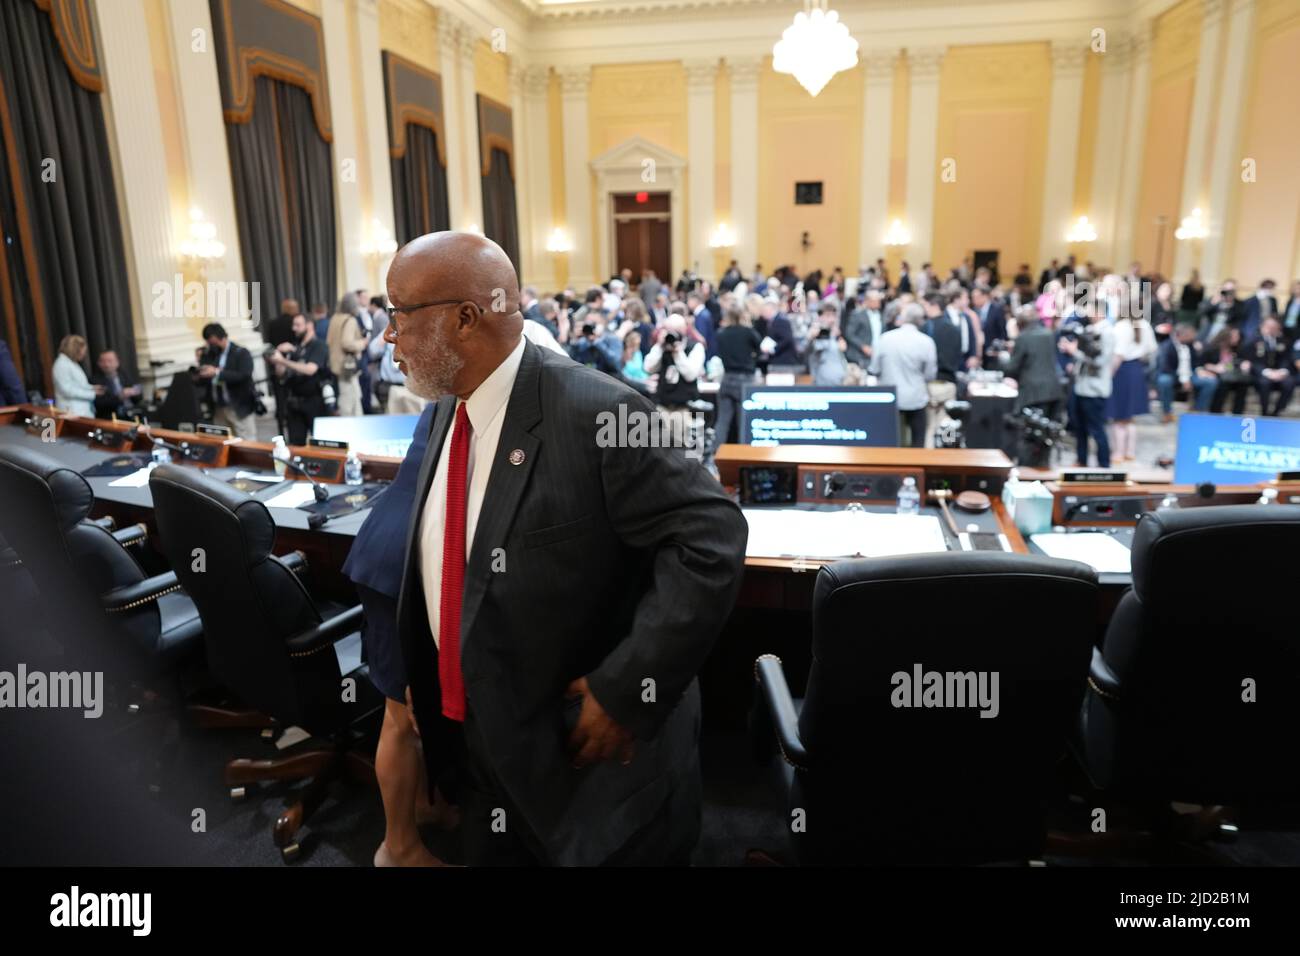 United States House Select Committee investigating the Jan. 6 attack - Chairman Rep. Bennie Thompson, D-Miss., and Vice Chairwoman Rep. Liz Cheney, R-Wyo., during the hearing on Capitol Hill, Thursday, June, 16, 2022. Credit: Doug Mills/Pool via CNP /MediaPunch Stock Photo